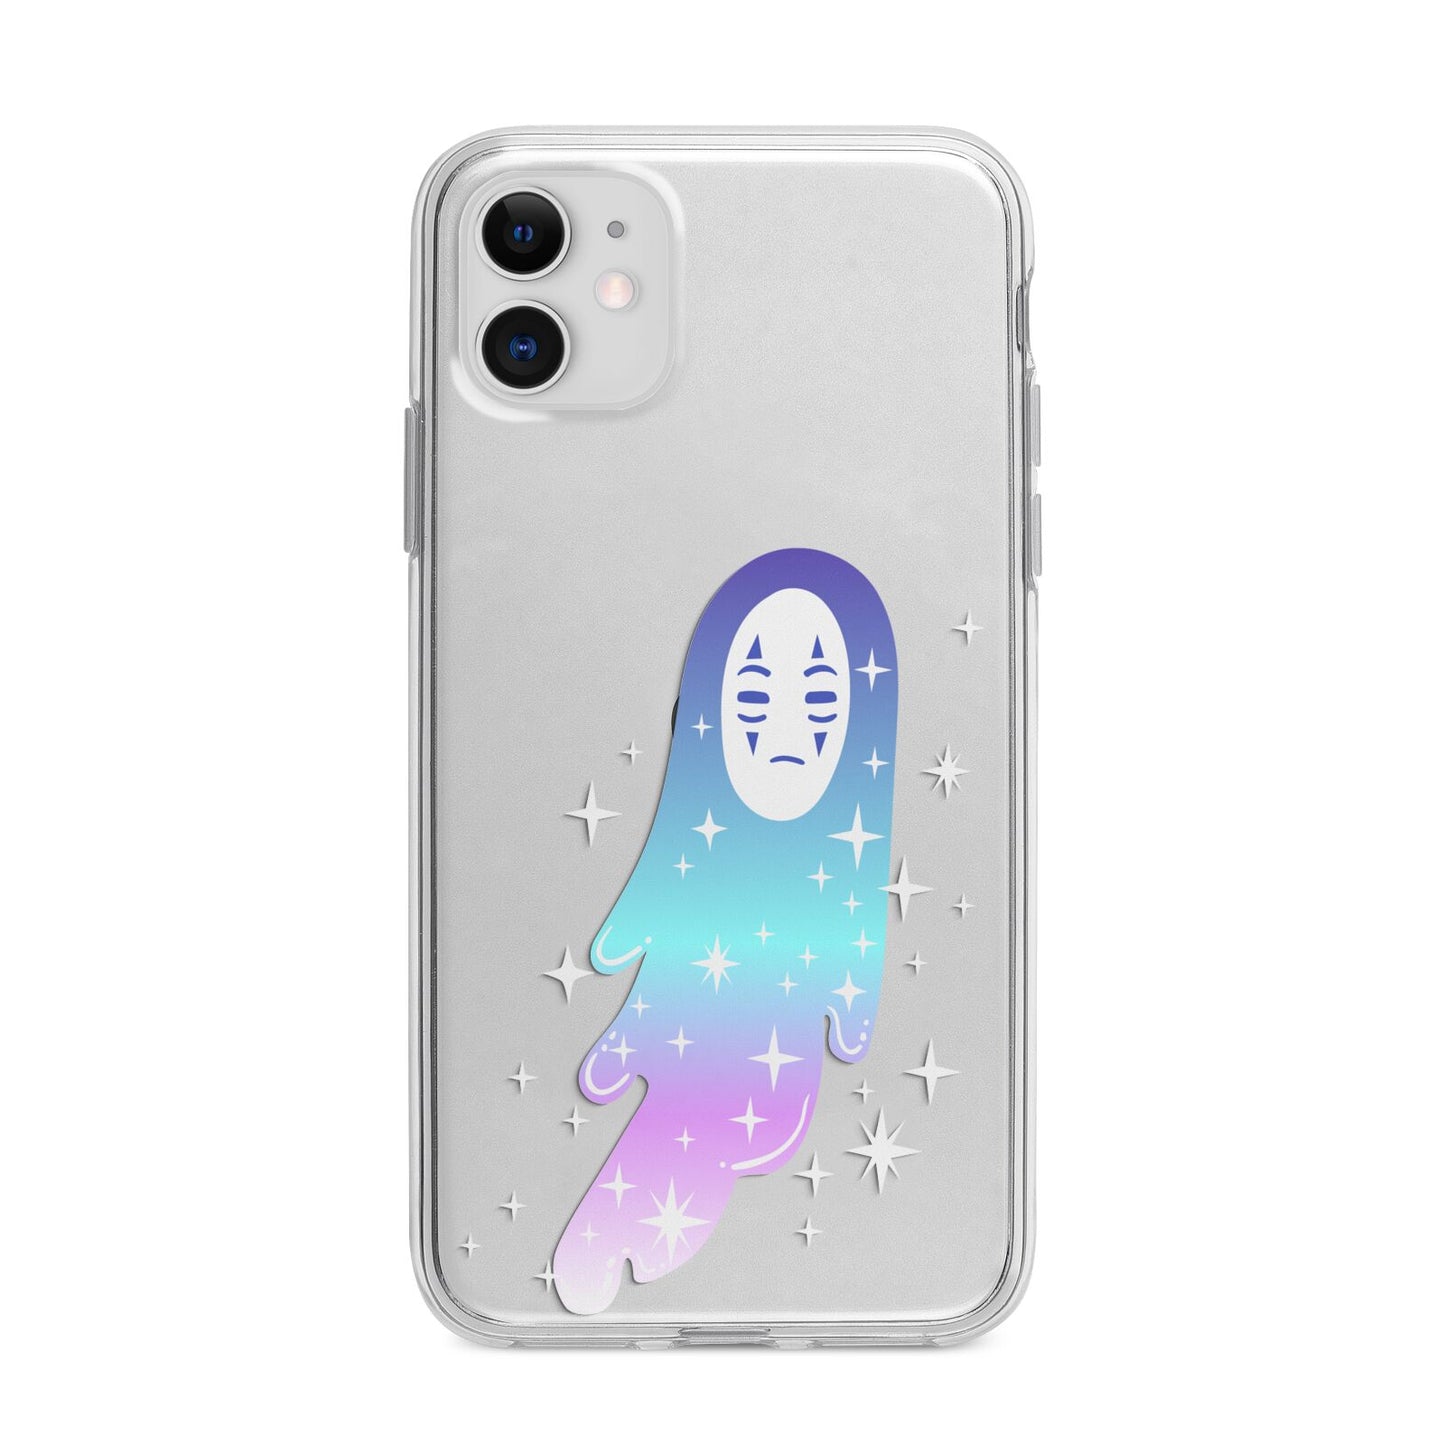 Starry Spectre Apple iPhone 11 in White with Bumper Case